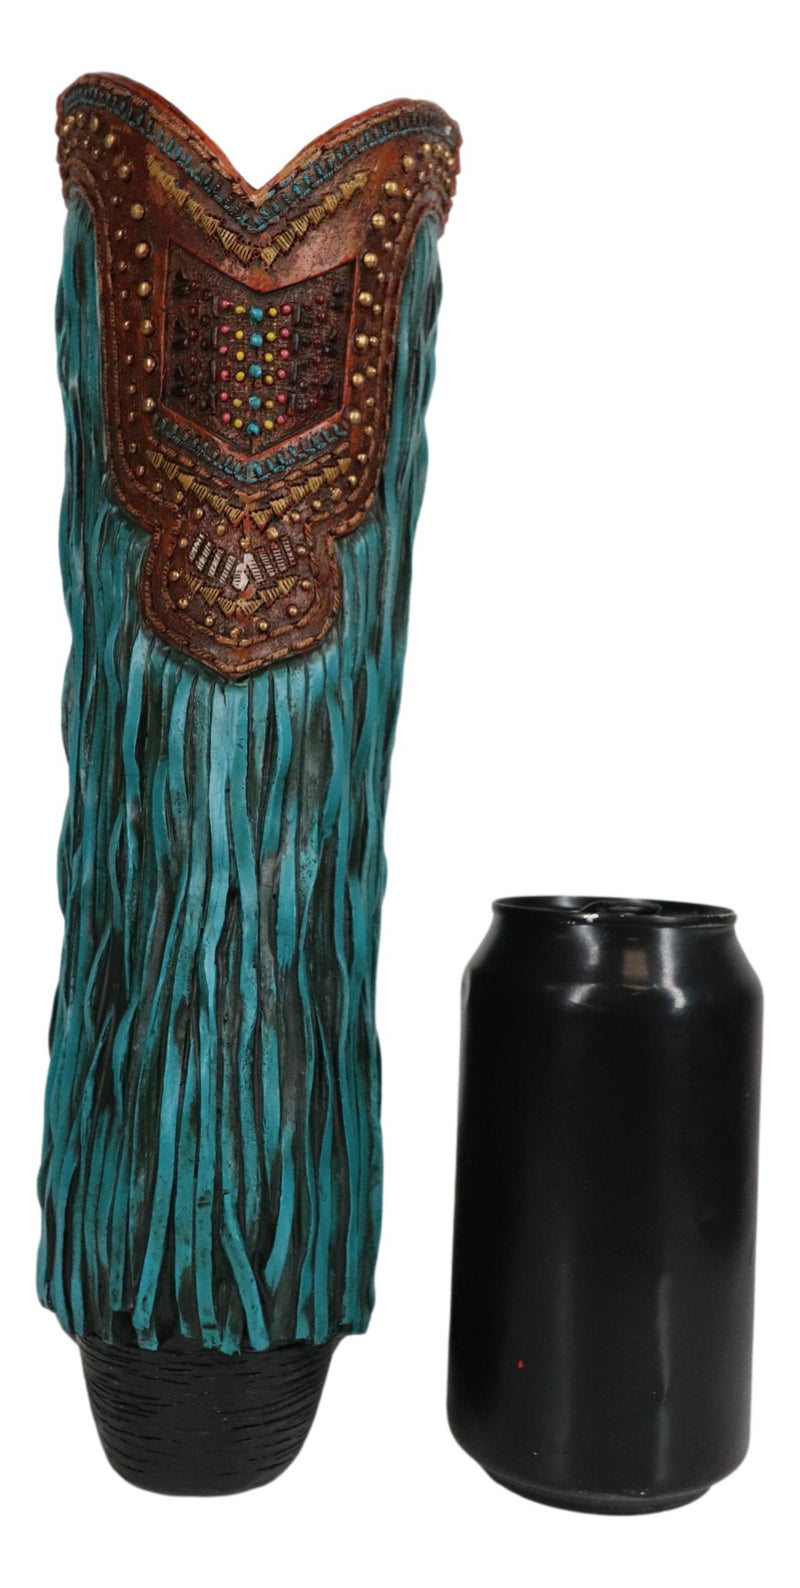 Rustic Western Country Faux Leather Cowgirl Boot Vase W/ Turquoise Frill Fringe